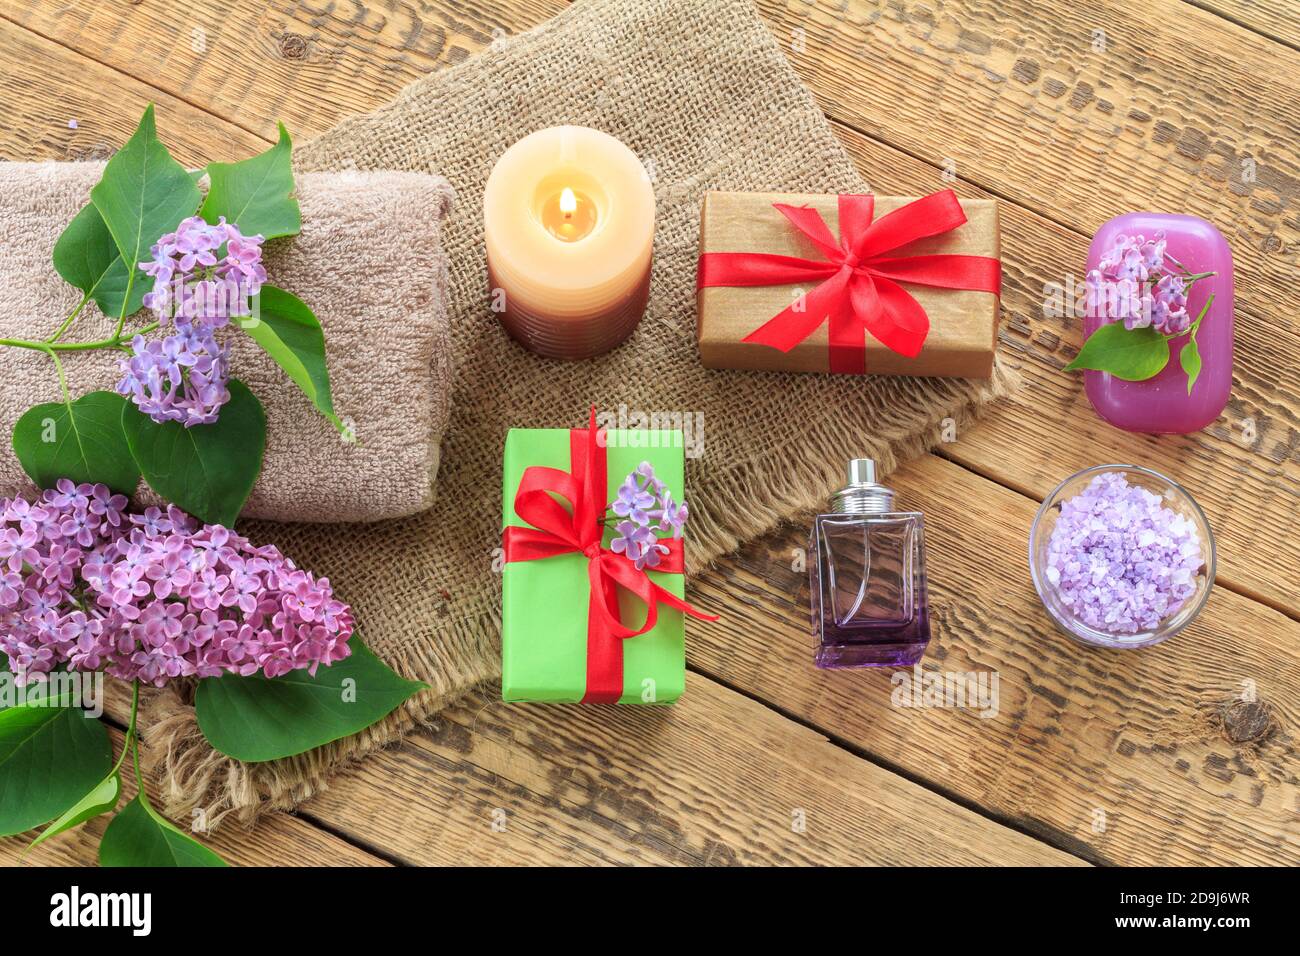 Terry towel, soap and sea salt for bathroom procedures, a burning candle, gift boxes, a bottle of perfume and lilac flowers on sackcloth and old woode Stock Photo